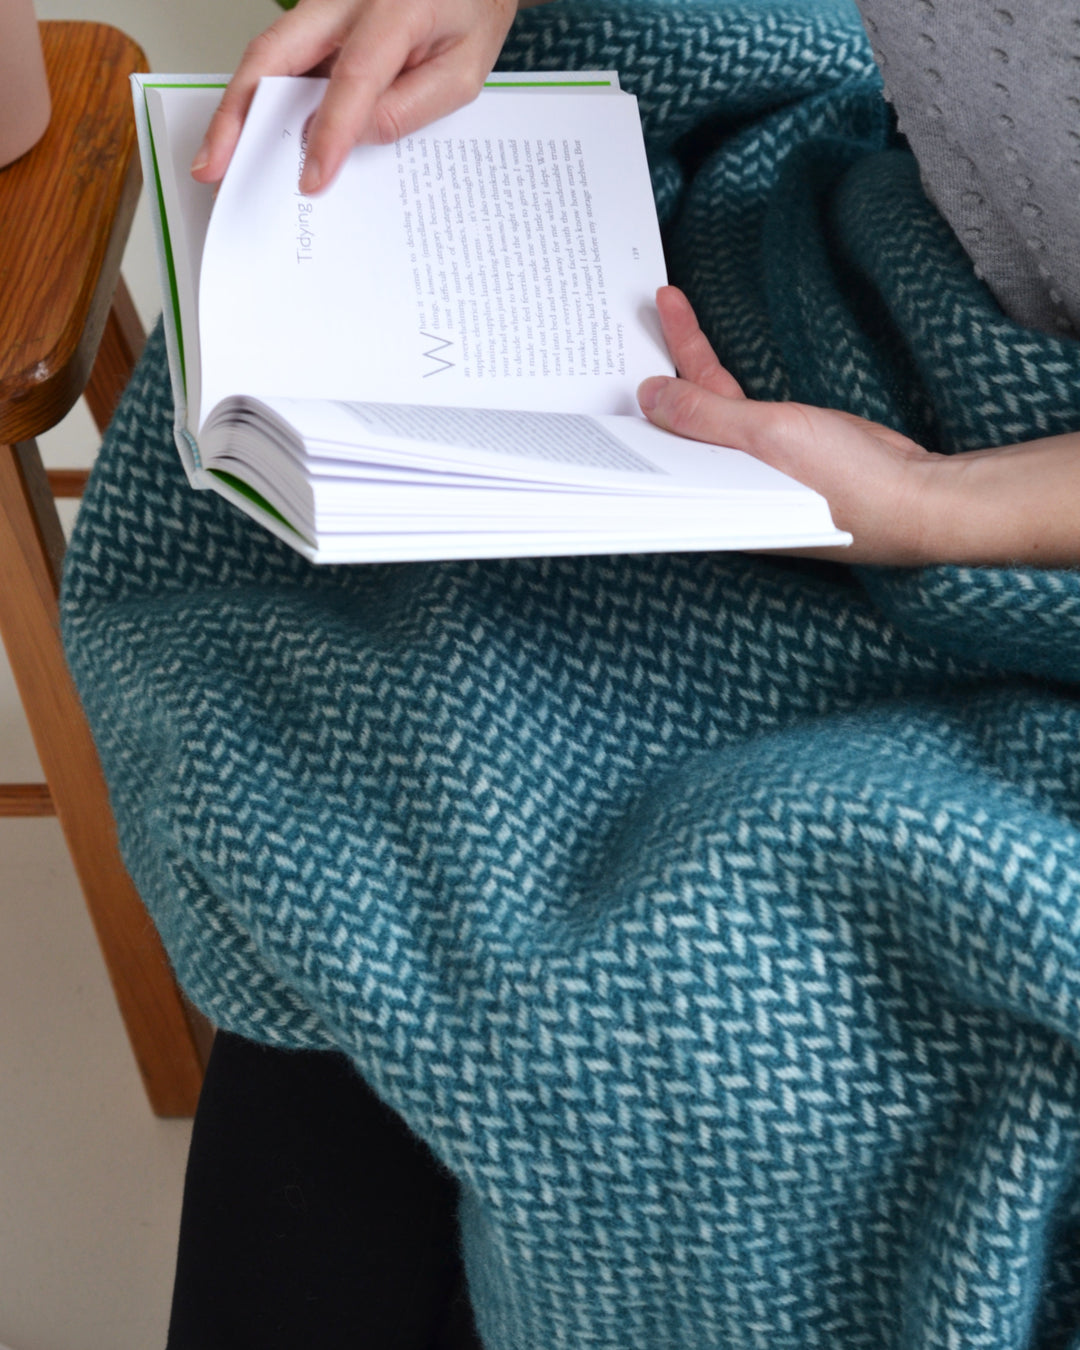 A person holding an open book. A green herringbone wool throw is draped over their lap.